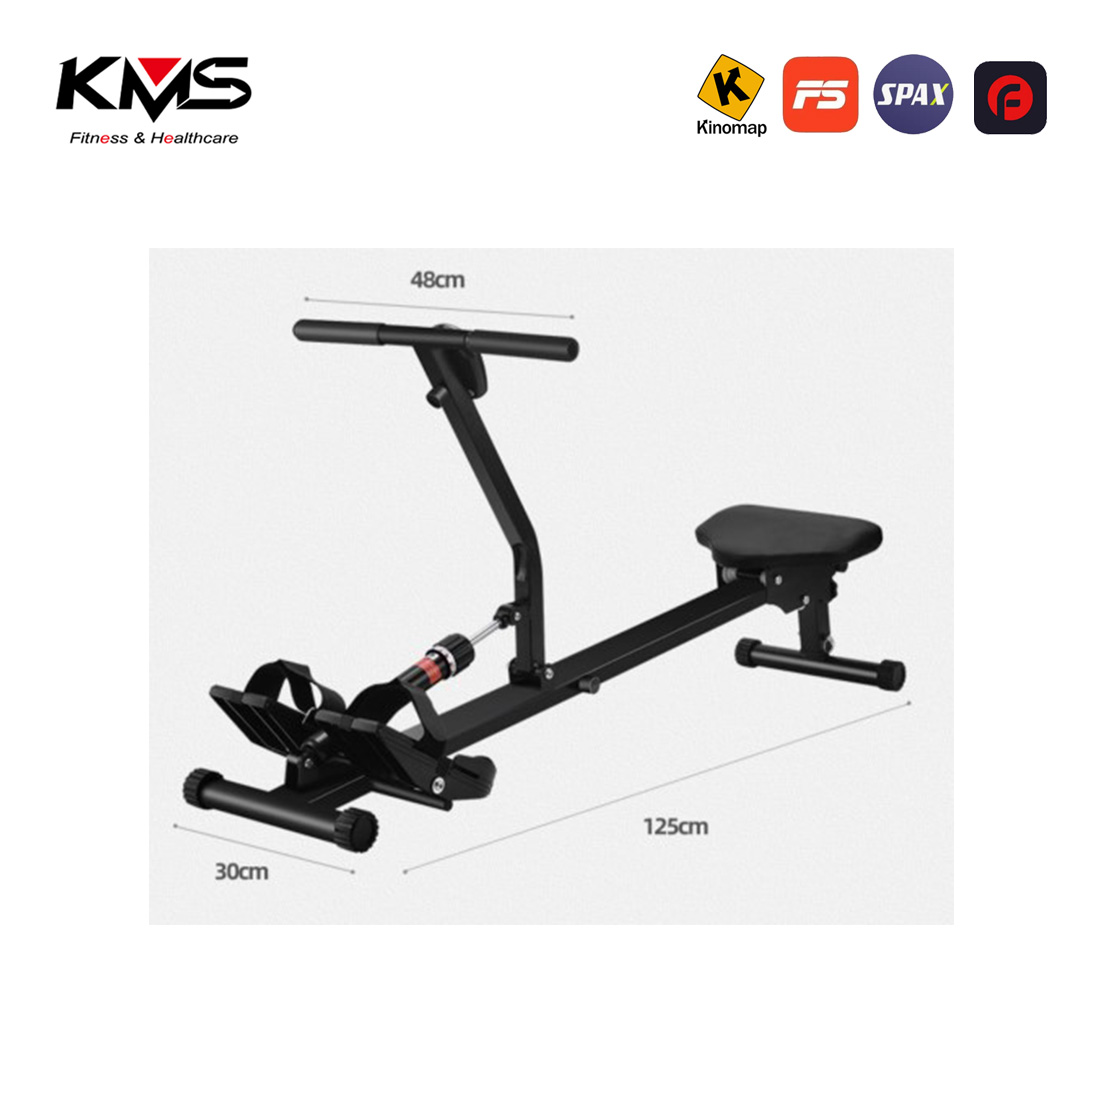 Hydraulic Rowing Machine - Compact Rower for Home